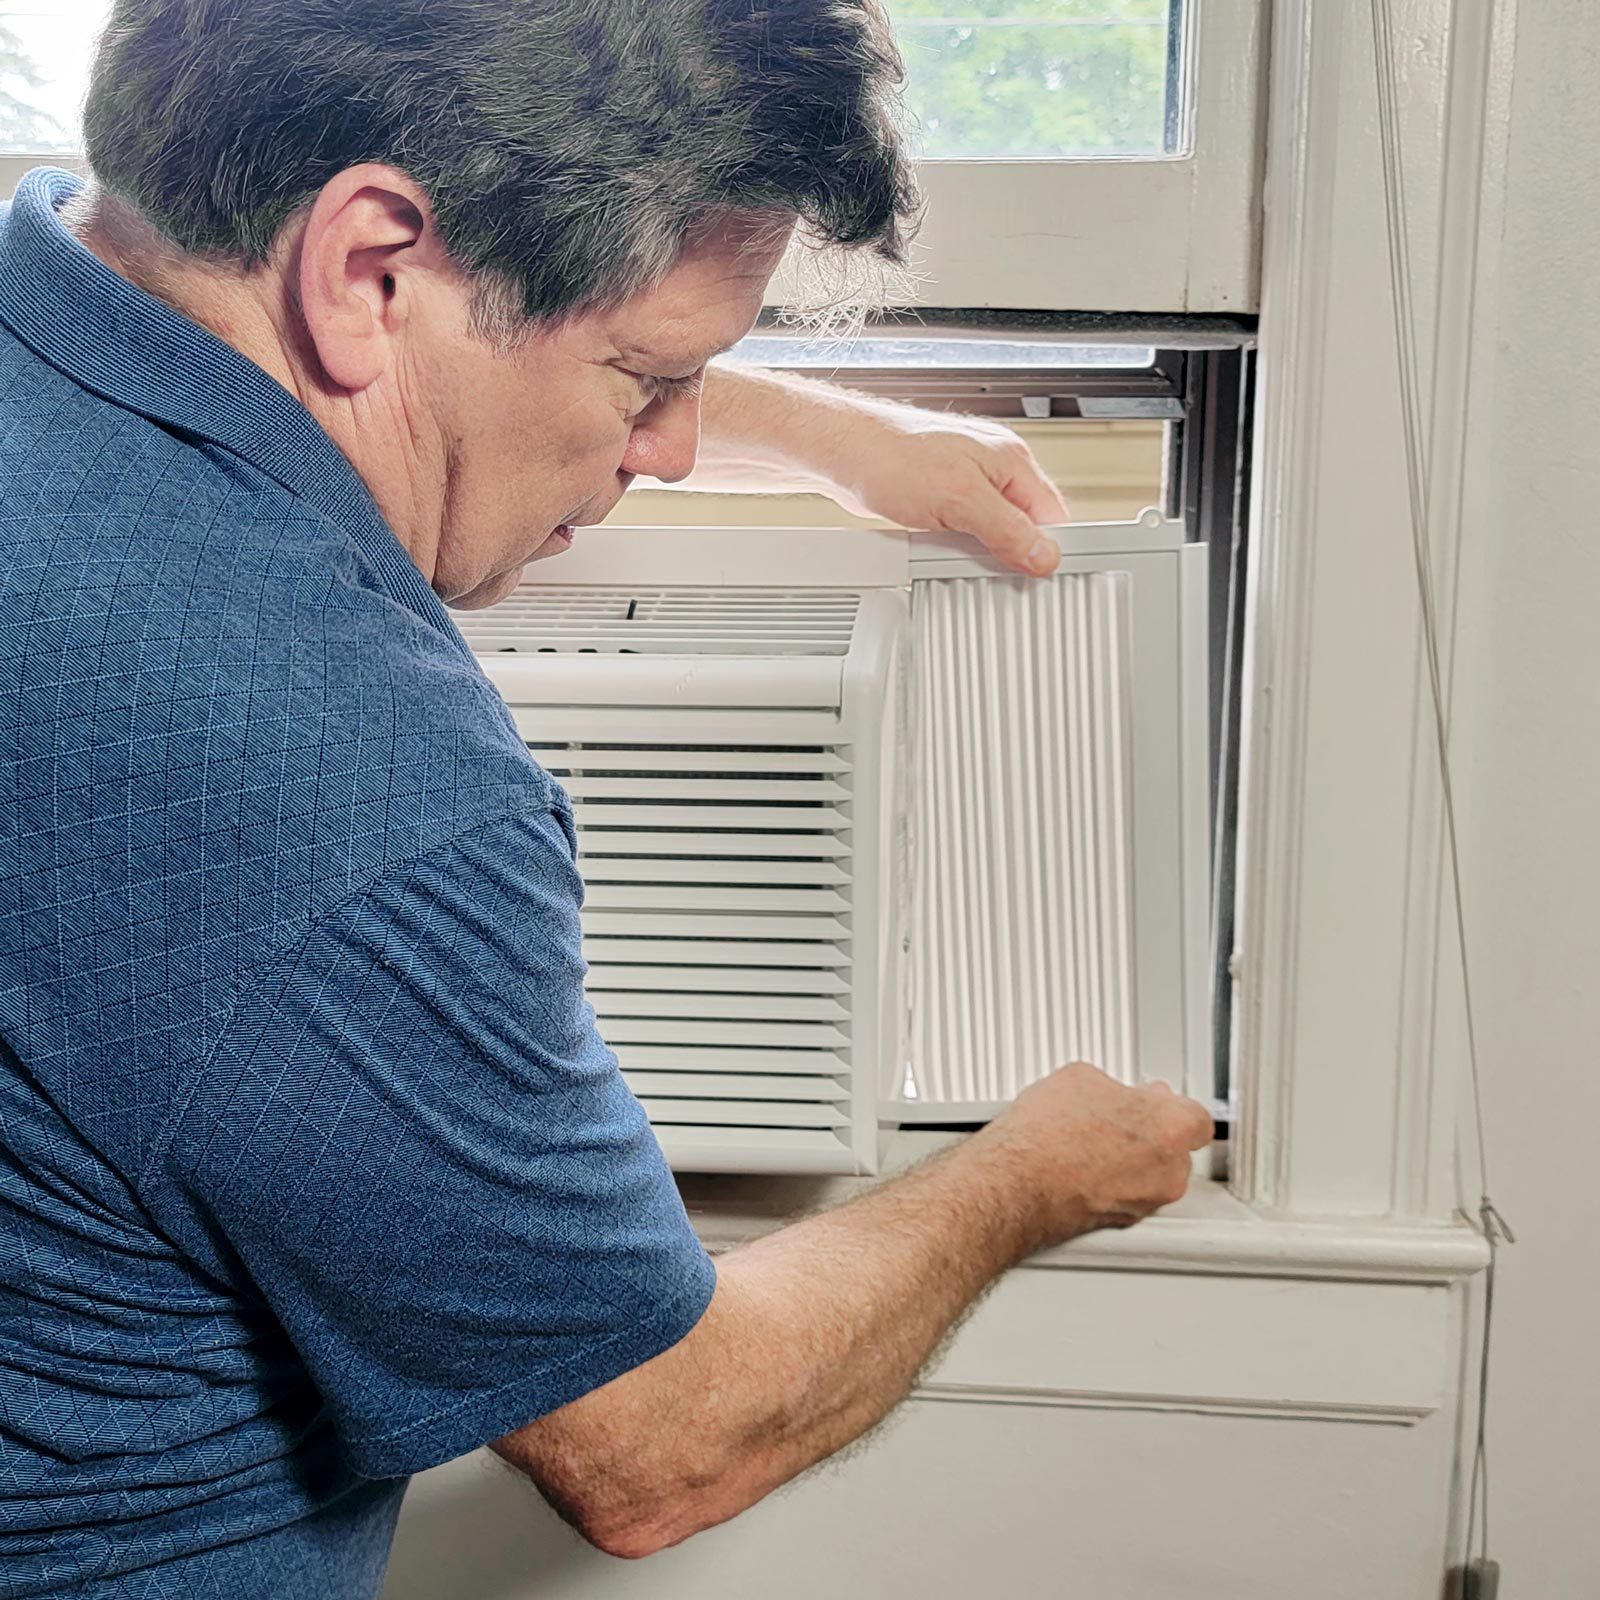 How to Install a Window AC Unit